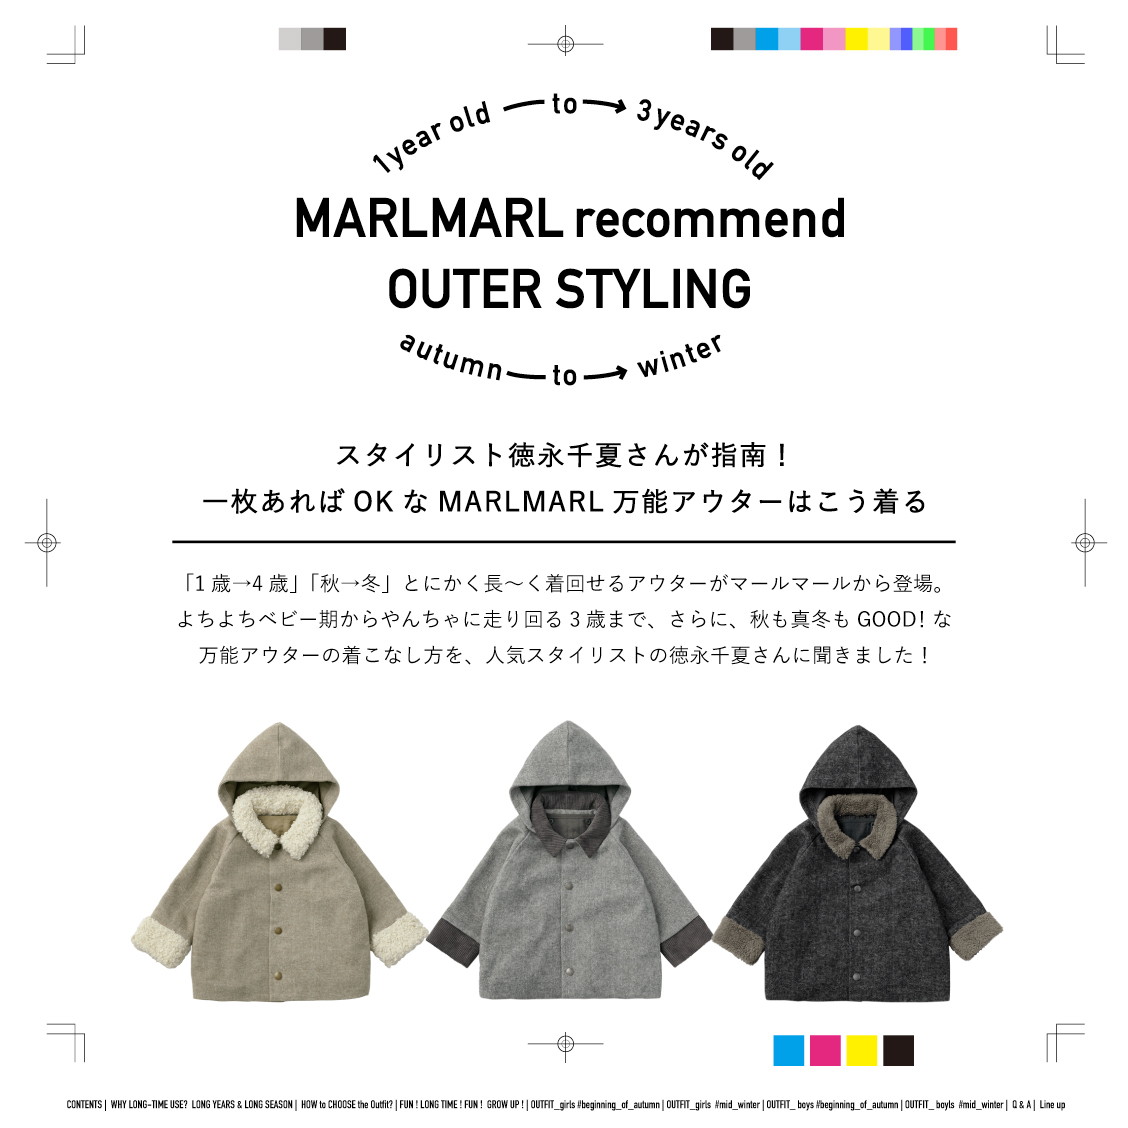 MARLMARL recommend OUTER STYLINGを紹介